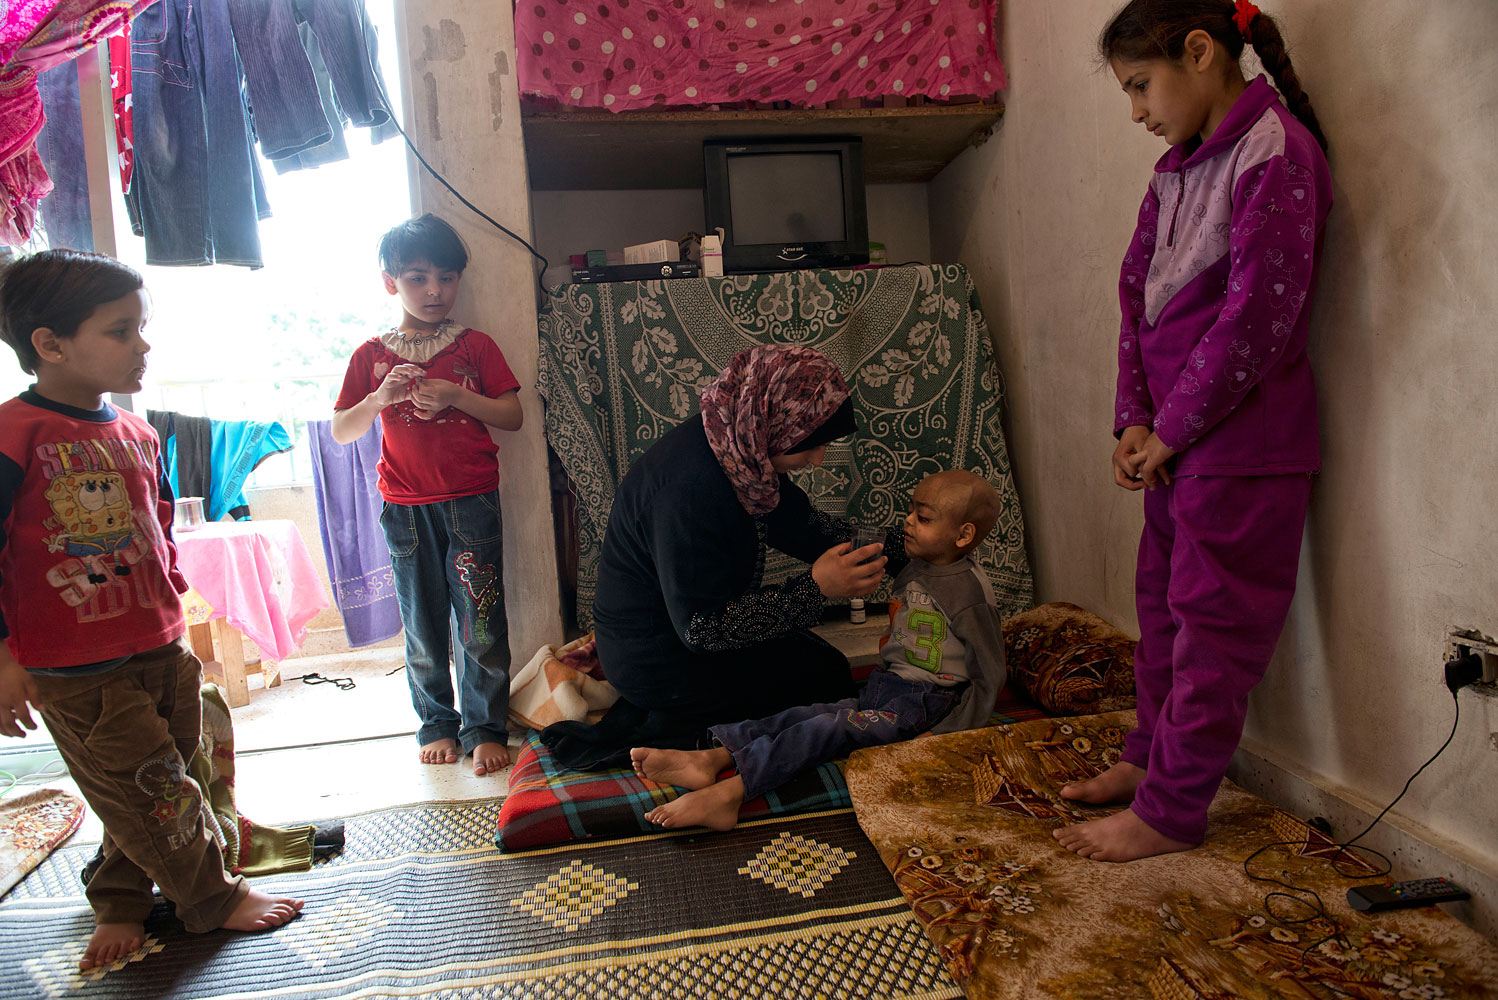 Feryal Delly, a Syrian refugee, gives water to her 4-year-old son Zacharia on March 9. Zacharia, who has a brain tumor, lives with his family in a rented apartment in Halat, north of Beirut. (Lynsey Addario—UNHCR)